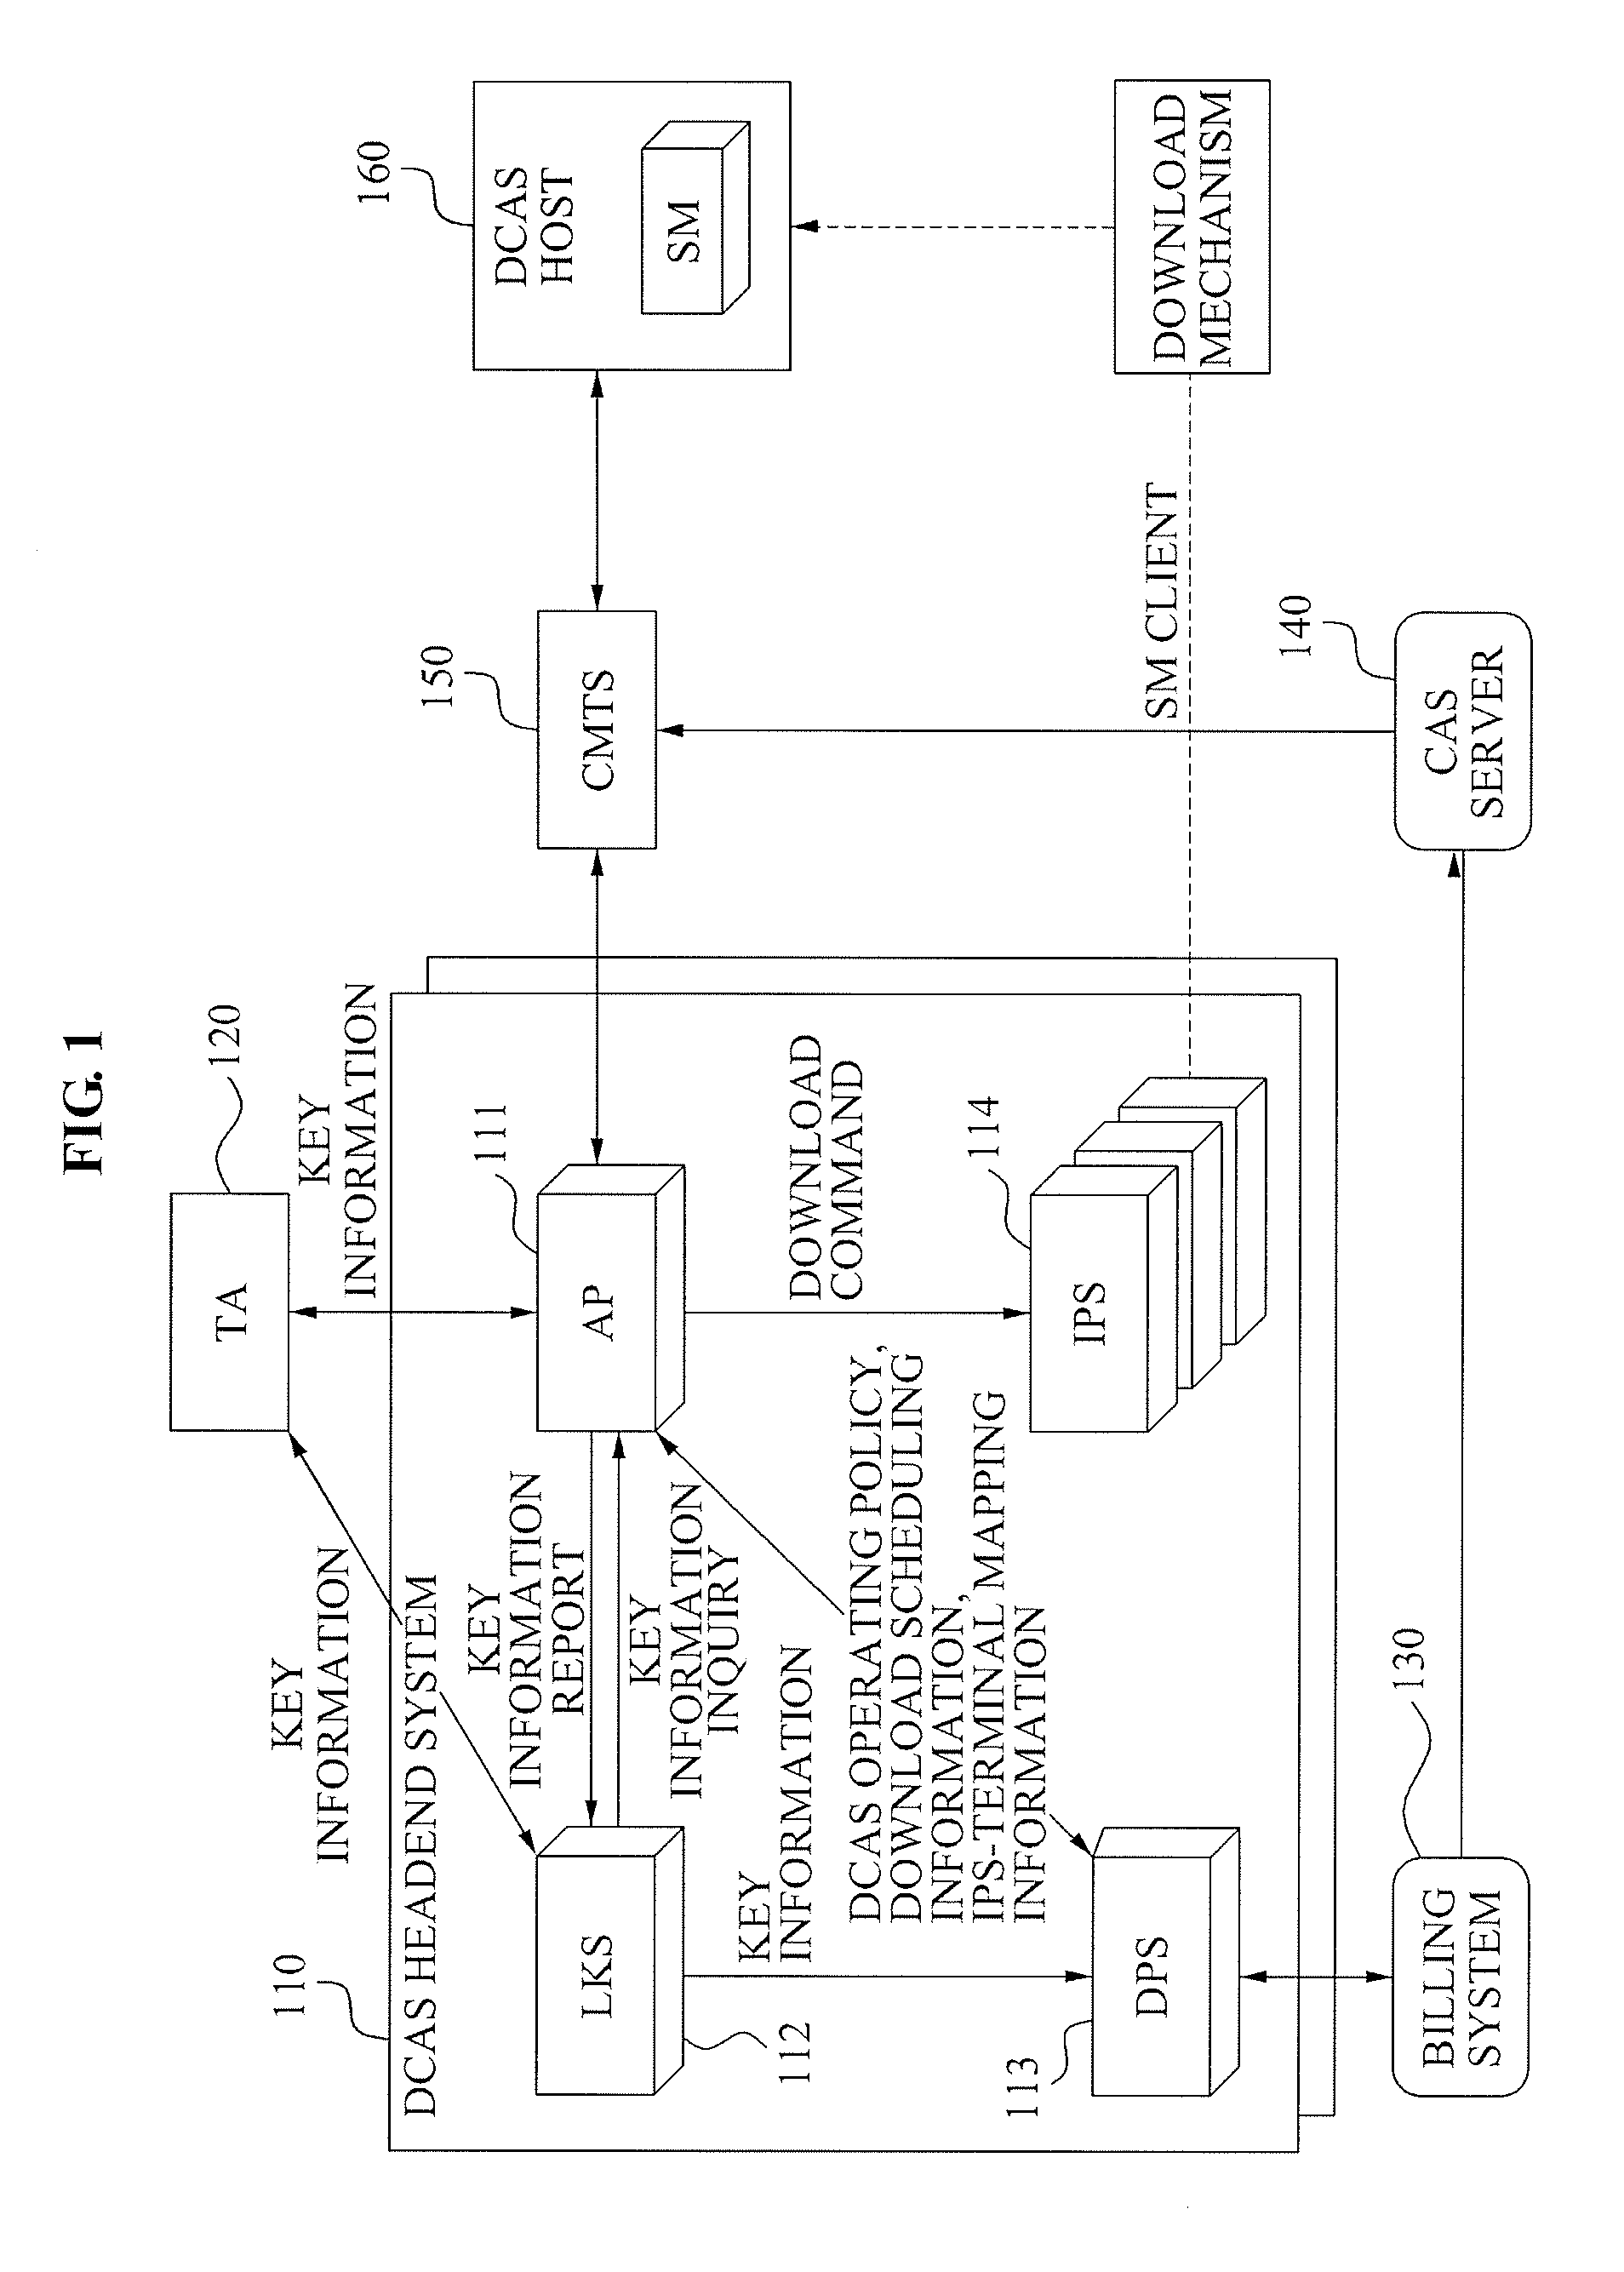 Method of controlling download load of secure micro client in downloadable conditional access system